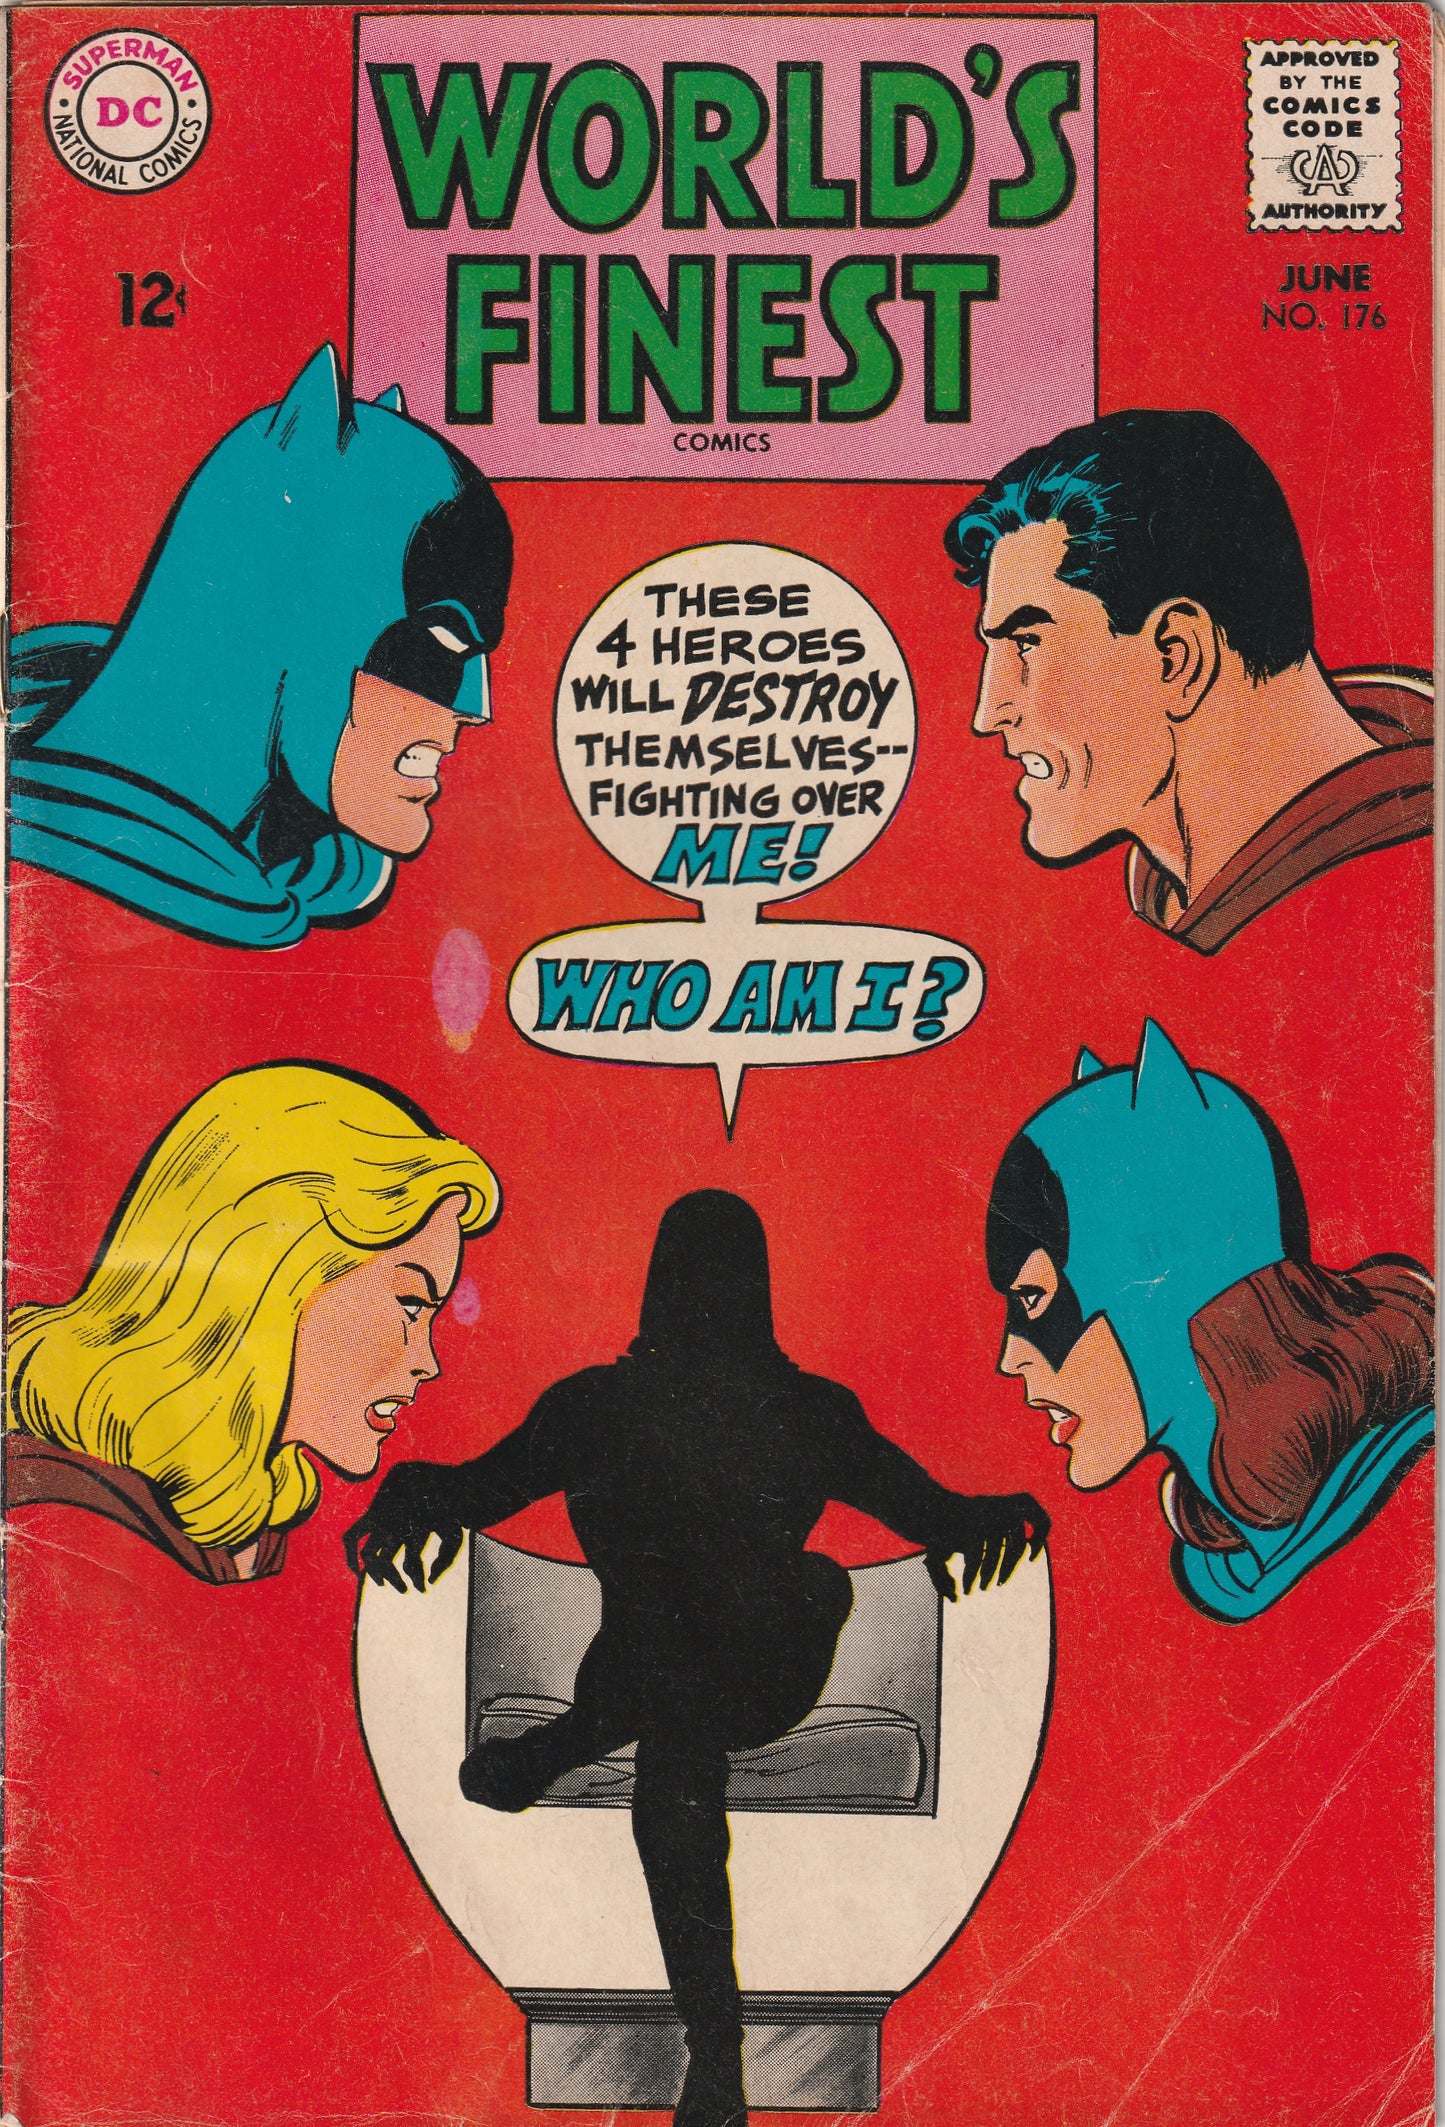 World's Finest #176 (1968) - Neal Adams cover